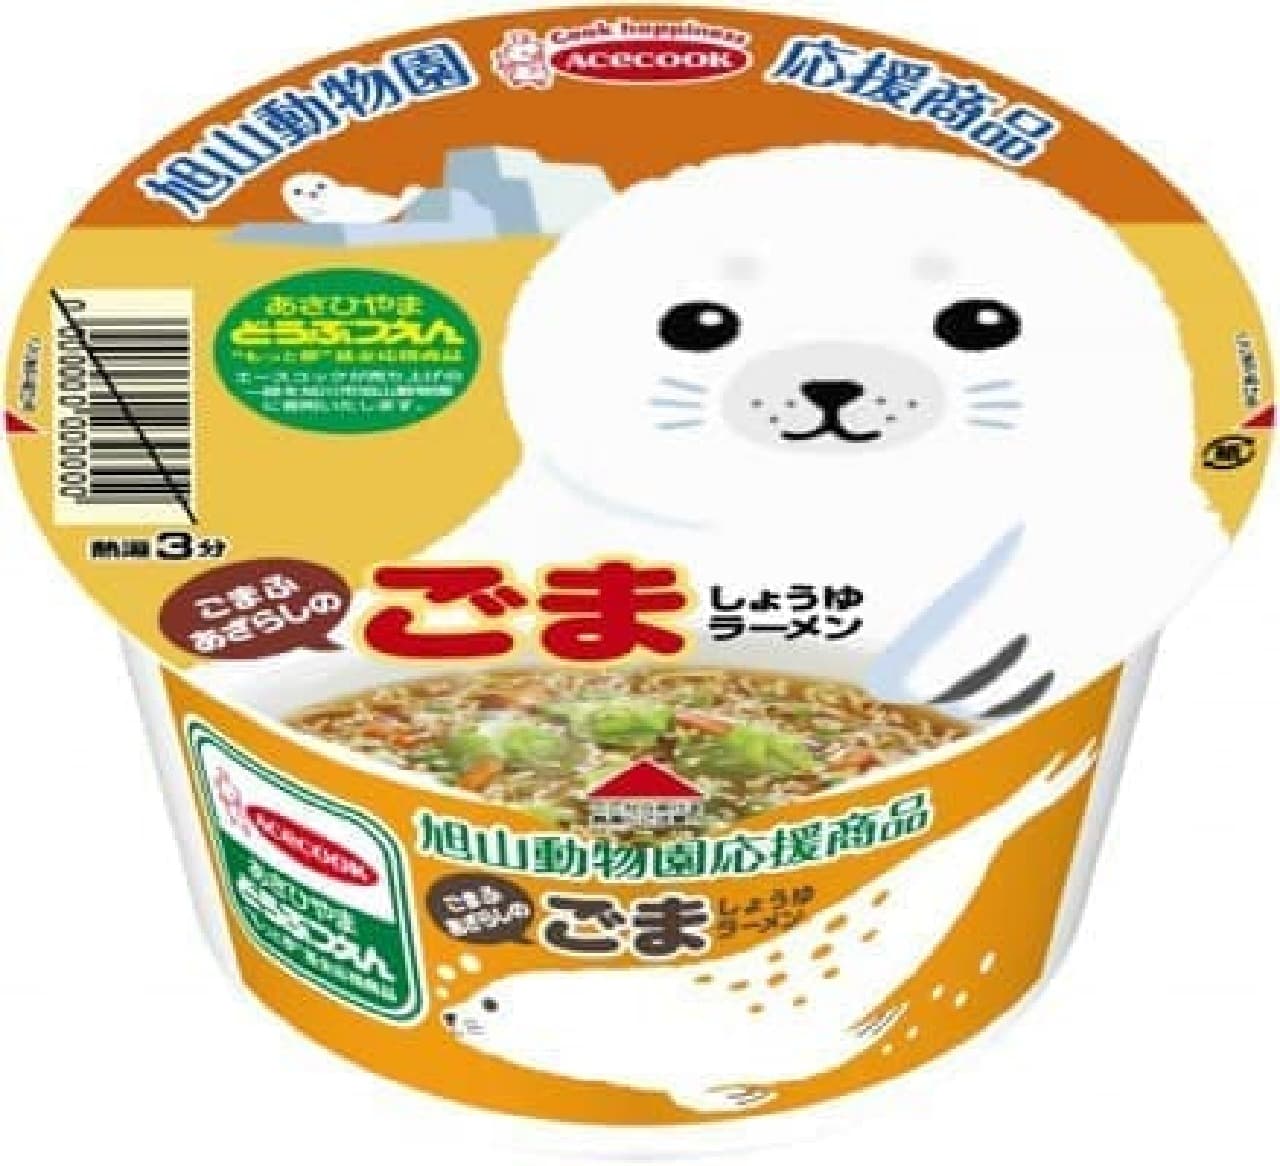 A sesame seal with cute round eyes